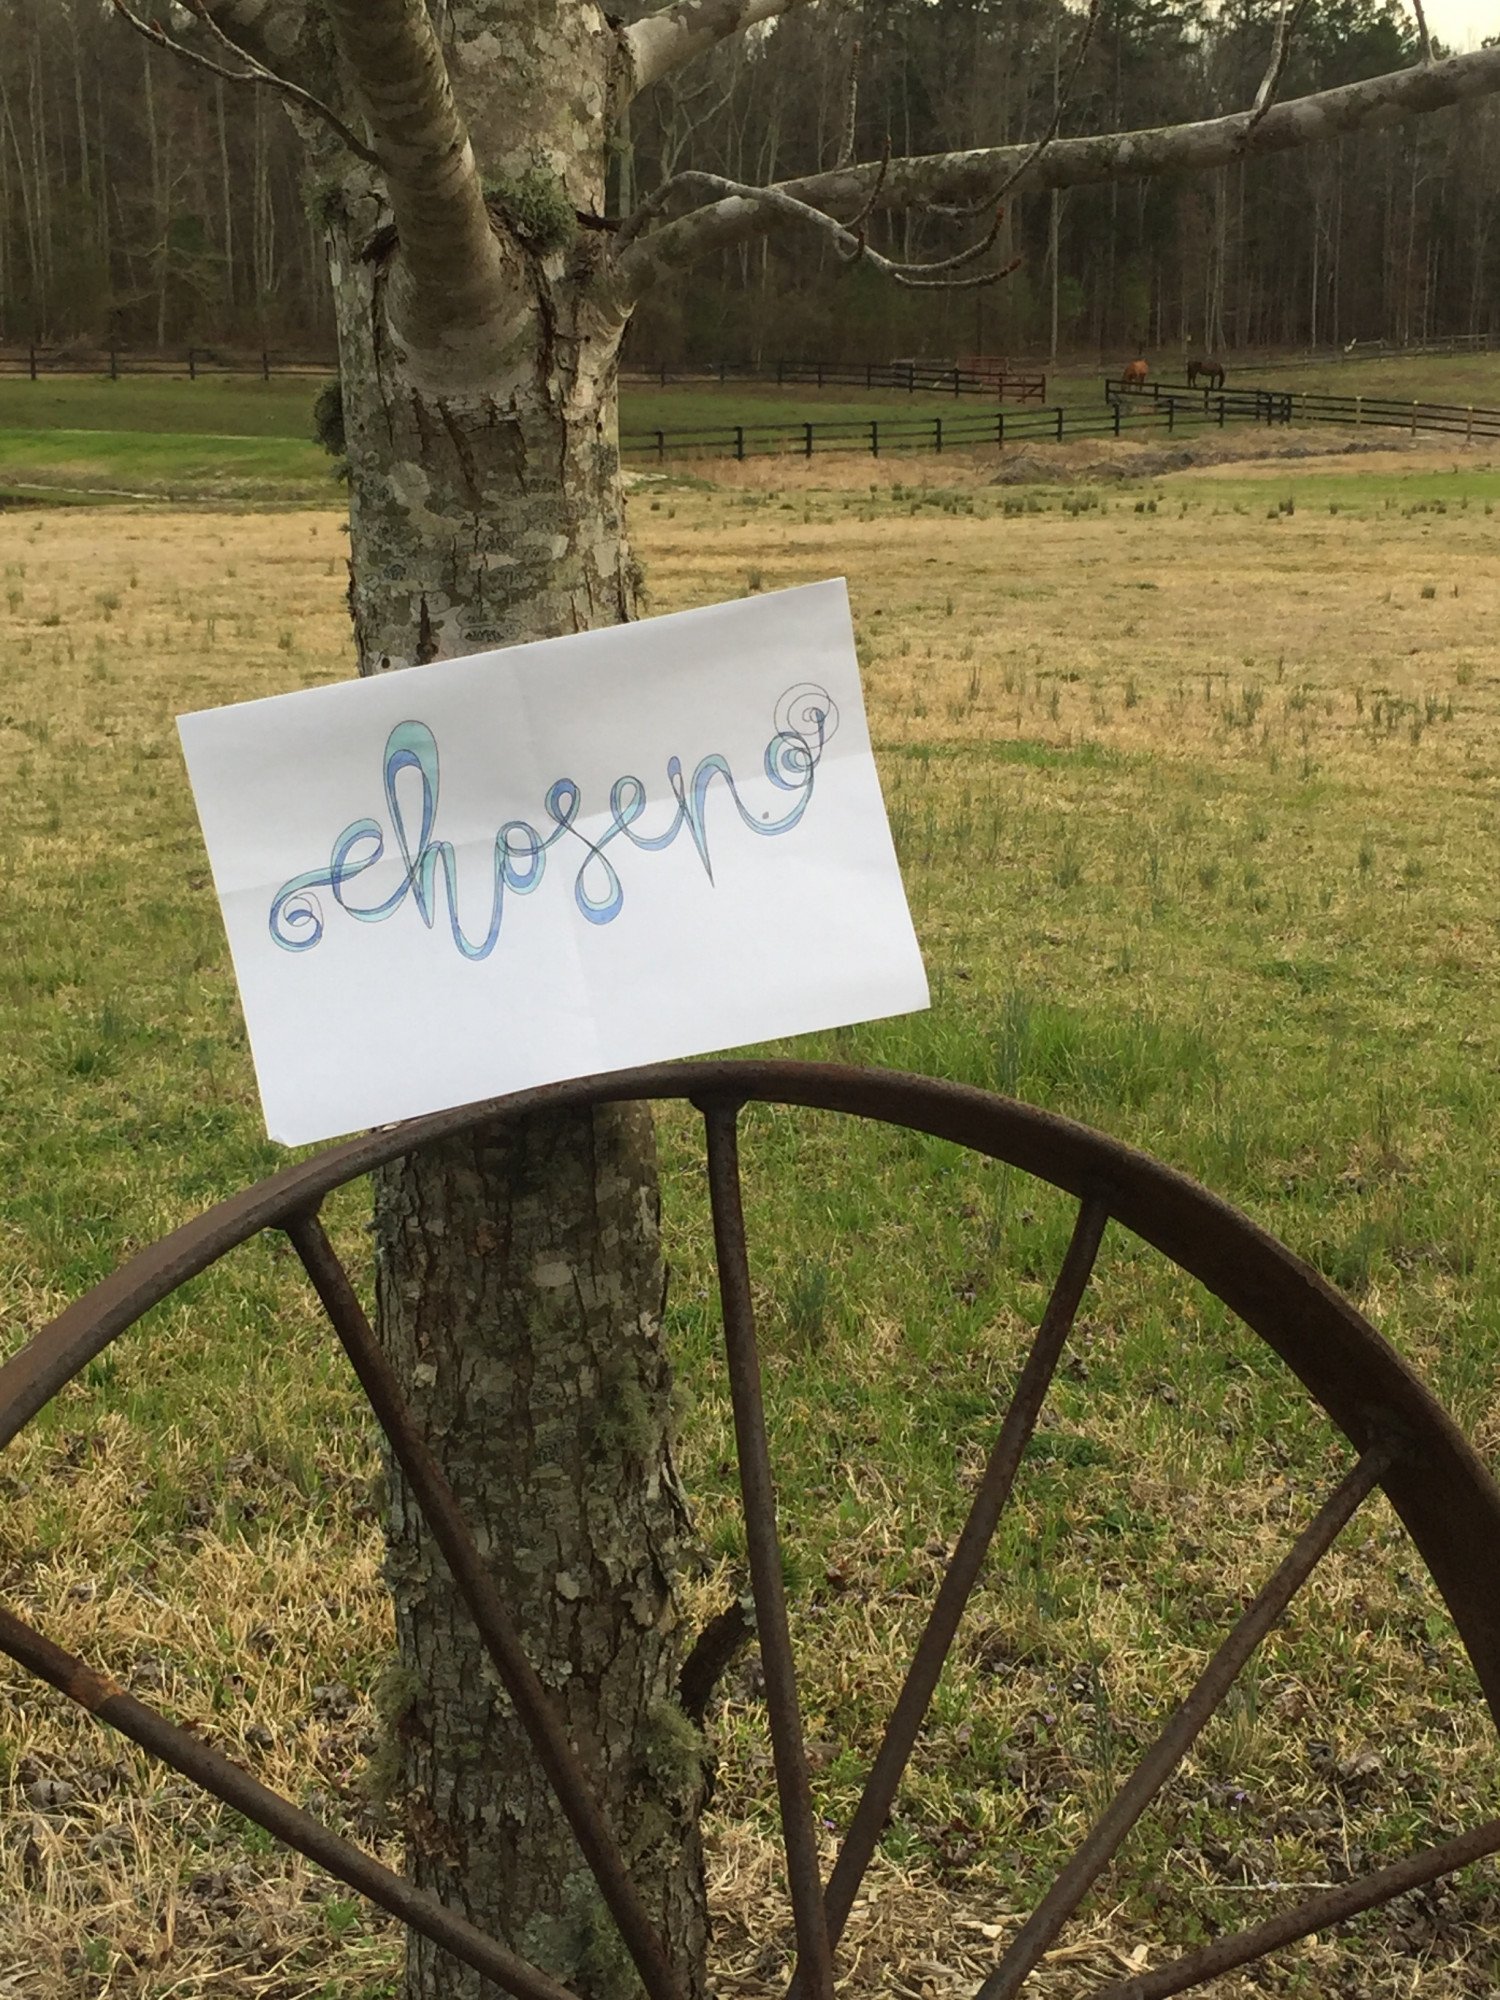 Sign that says "chosen" propped up on an antique wheel by a tree 